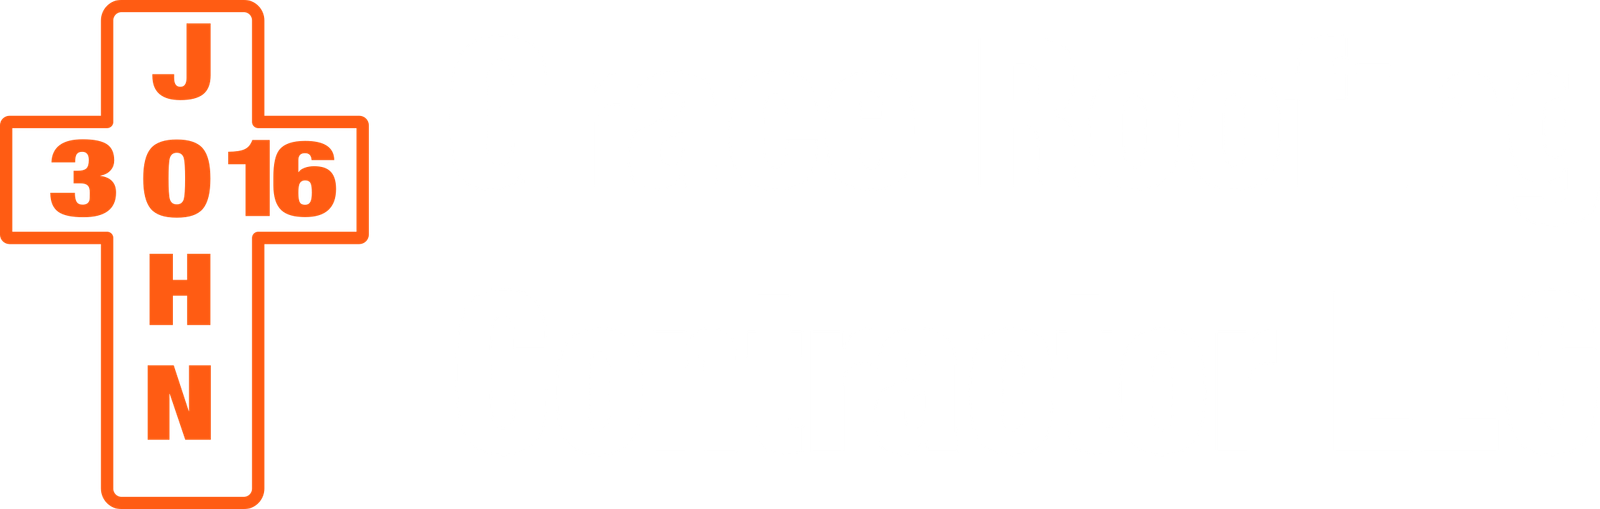 Grace Roofing Contractor